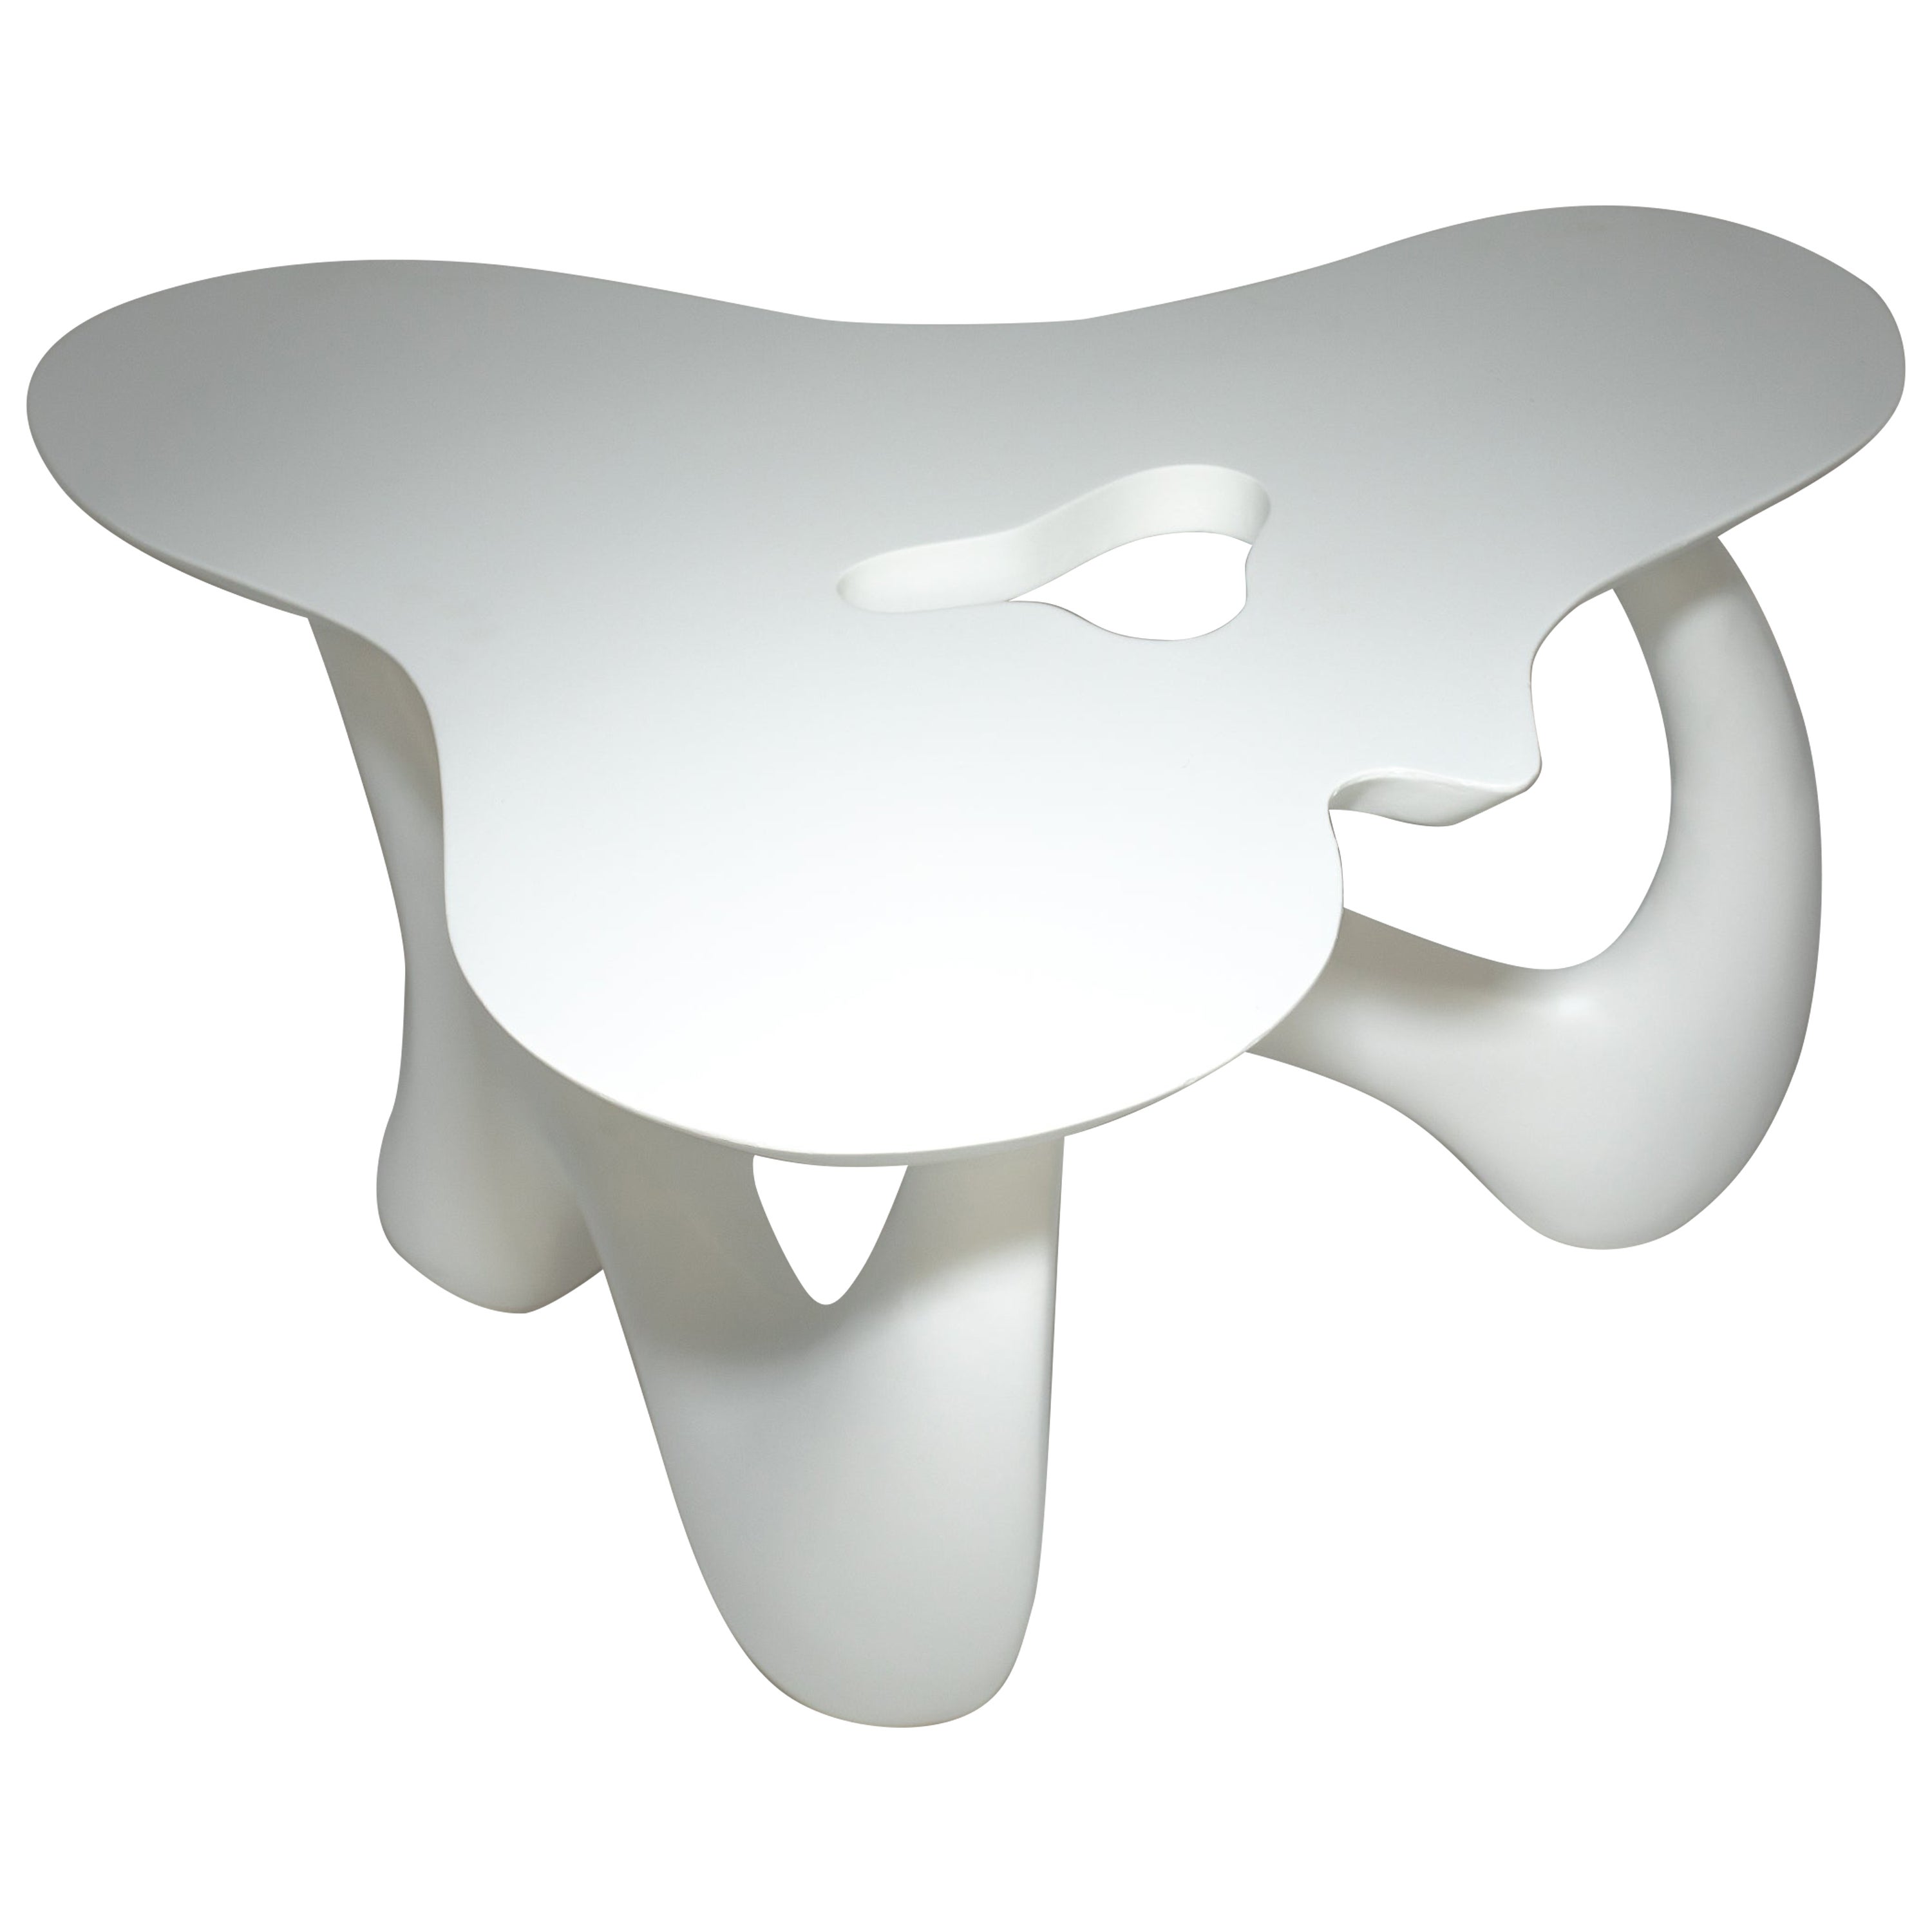 White Lacquered Biomorphic Table For Sale